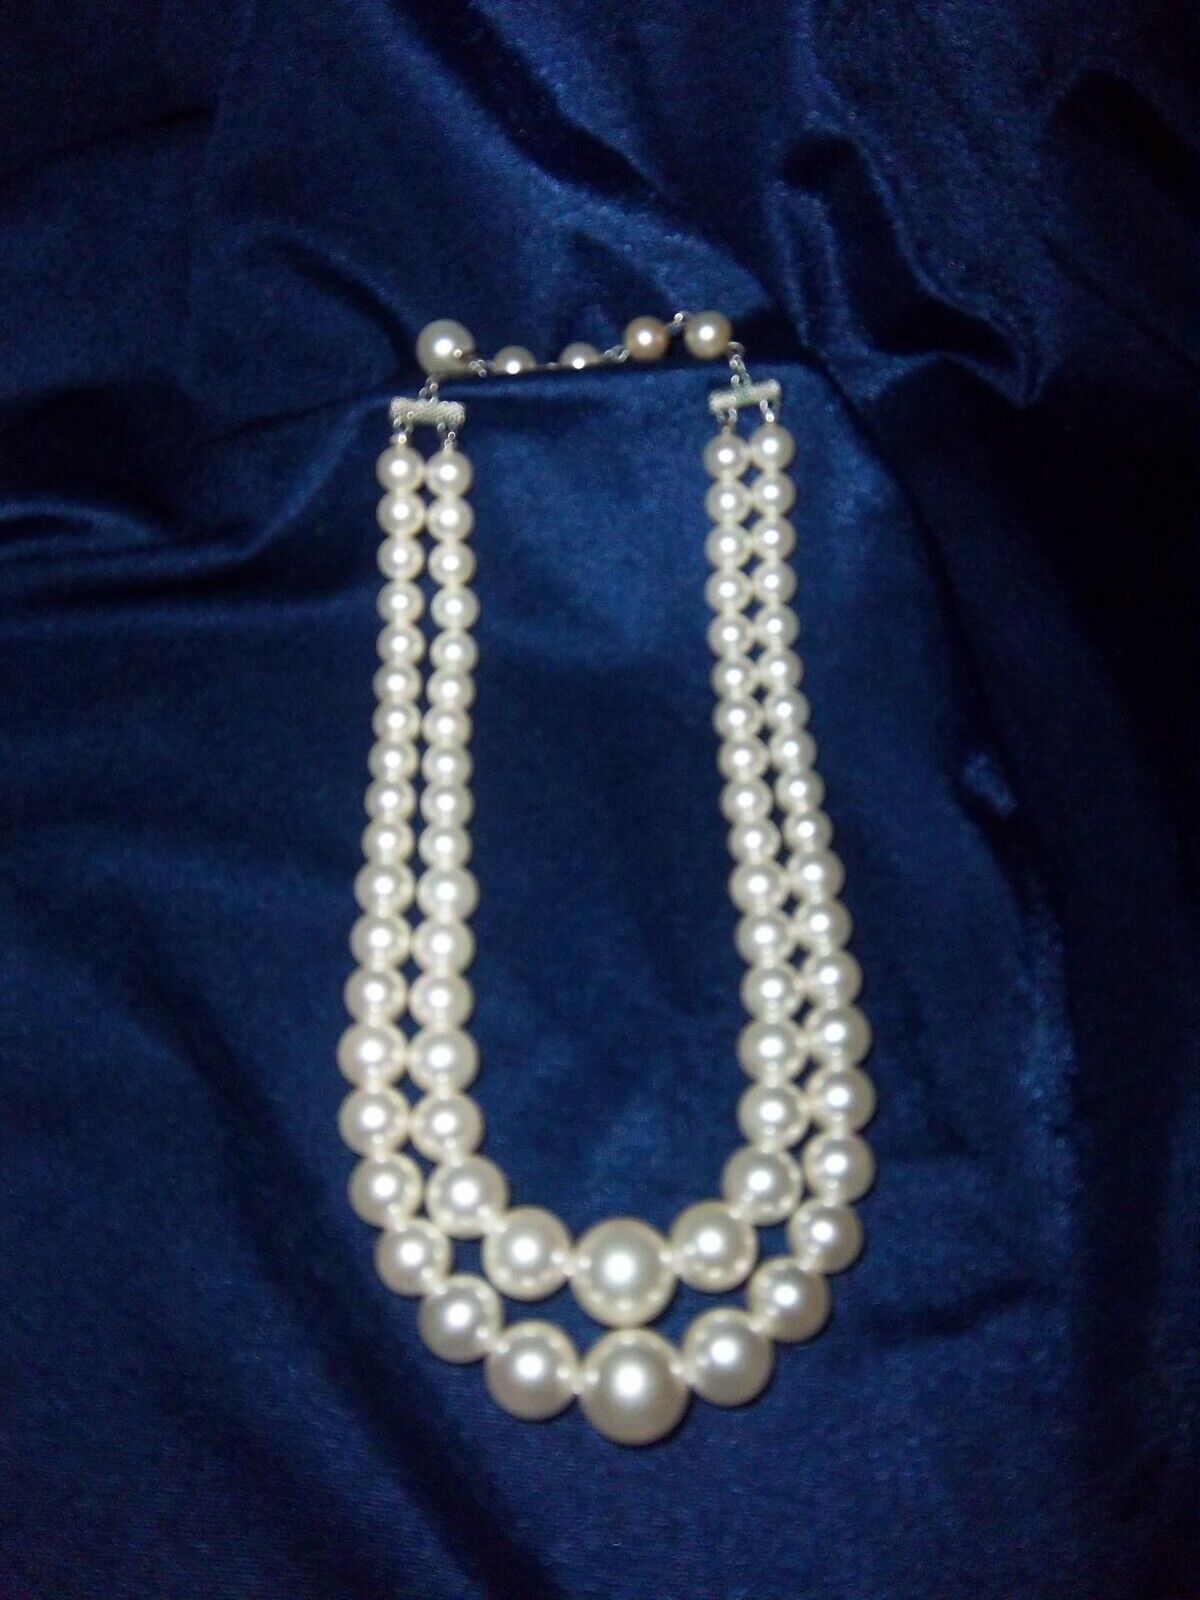 Vintage Pearl and Crystal Beaded Necklace Double Strand- Faux Pearl Necklace Circa 1950/'s Mid Century Bridal Jewellery